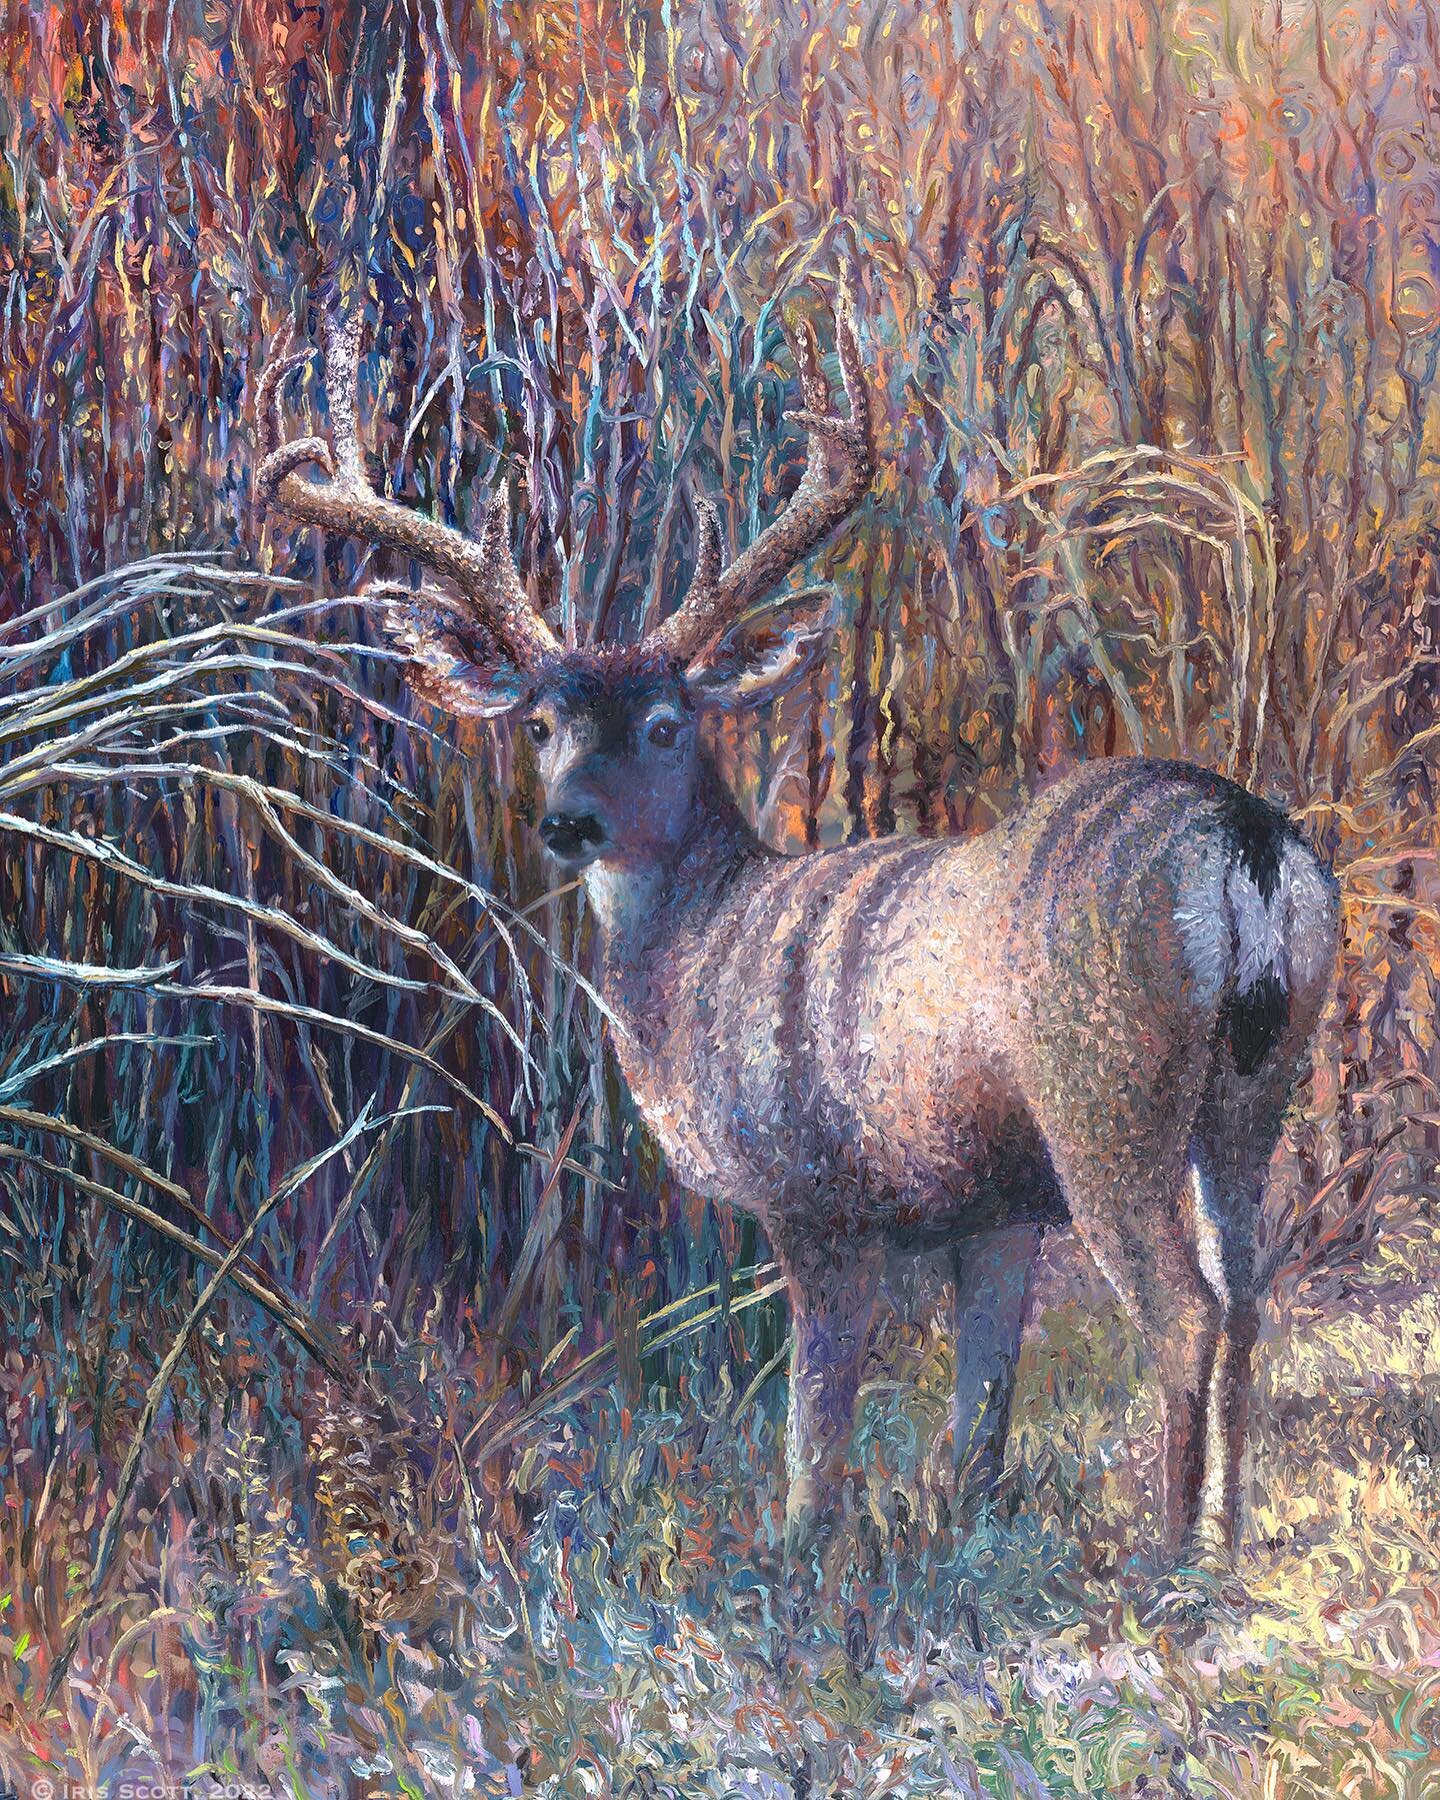 New! Original sold. 60x48 inch. #MuleDeer special thanks to @adelmanfineart 

Fingerpainted @holbeinoils on a @masterpiececanvas 

Native to New Mexico I&rsquo;m very lucky to see these creatures bounding around the sage bush as if they&rsquo;re spri